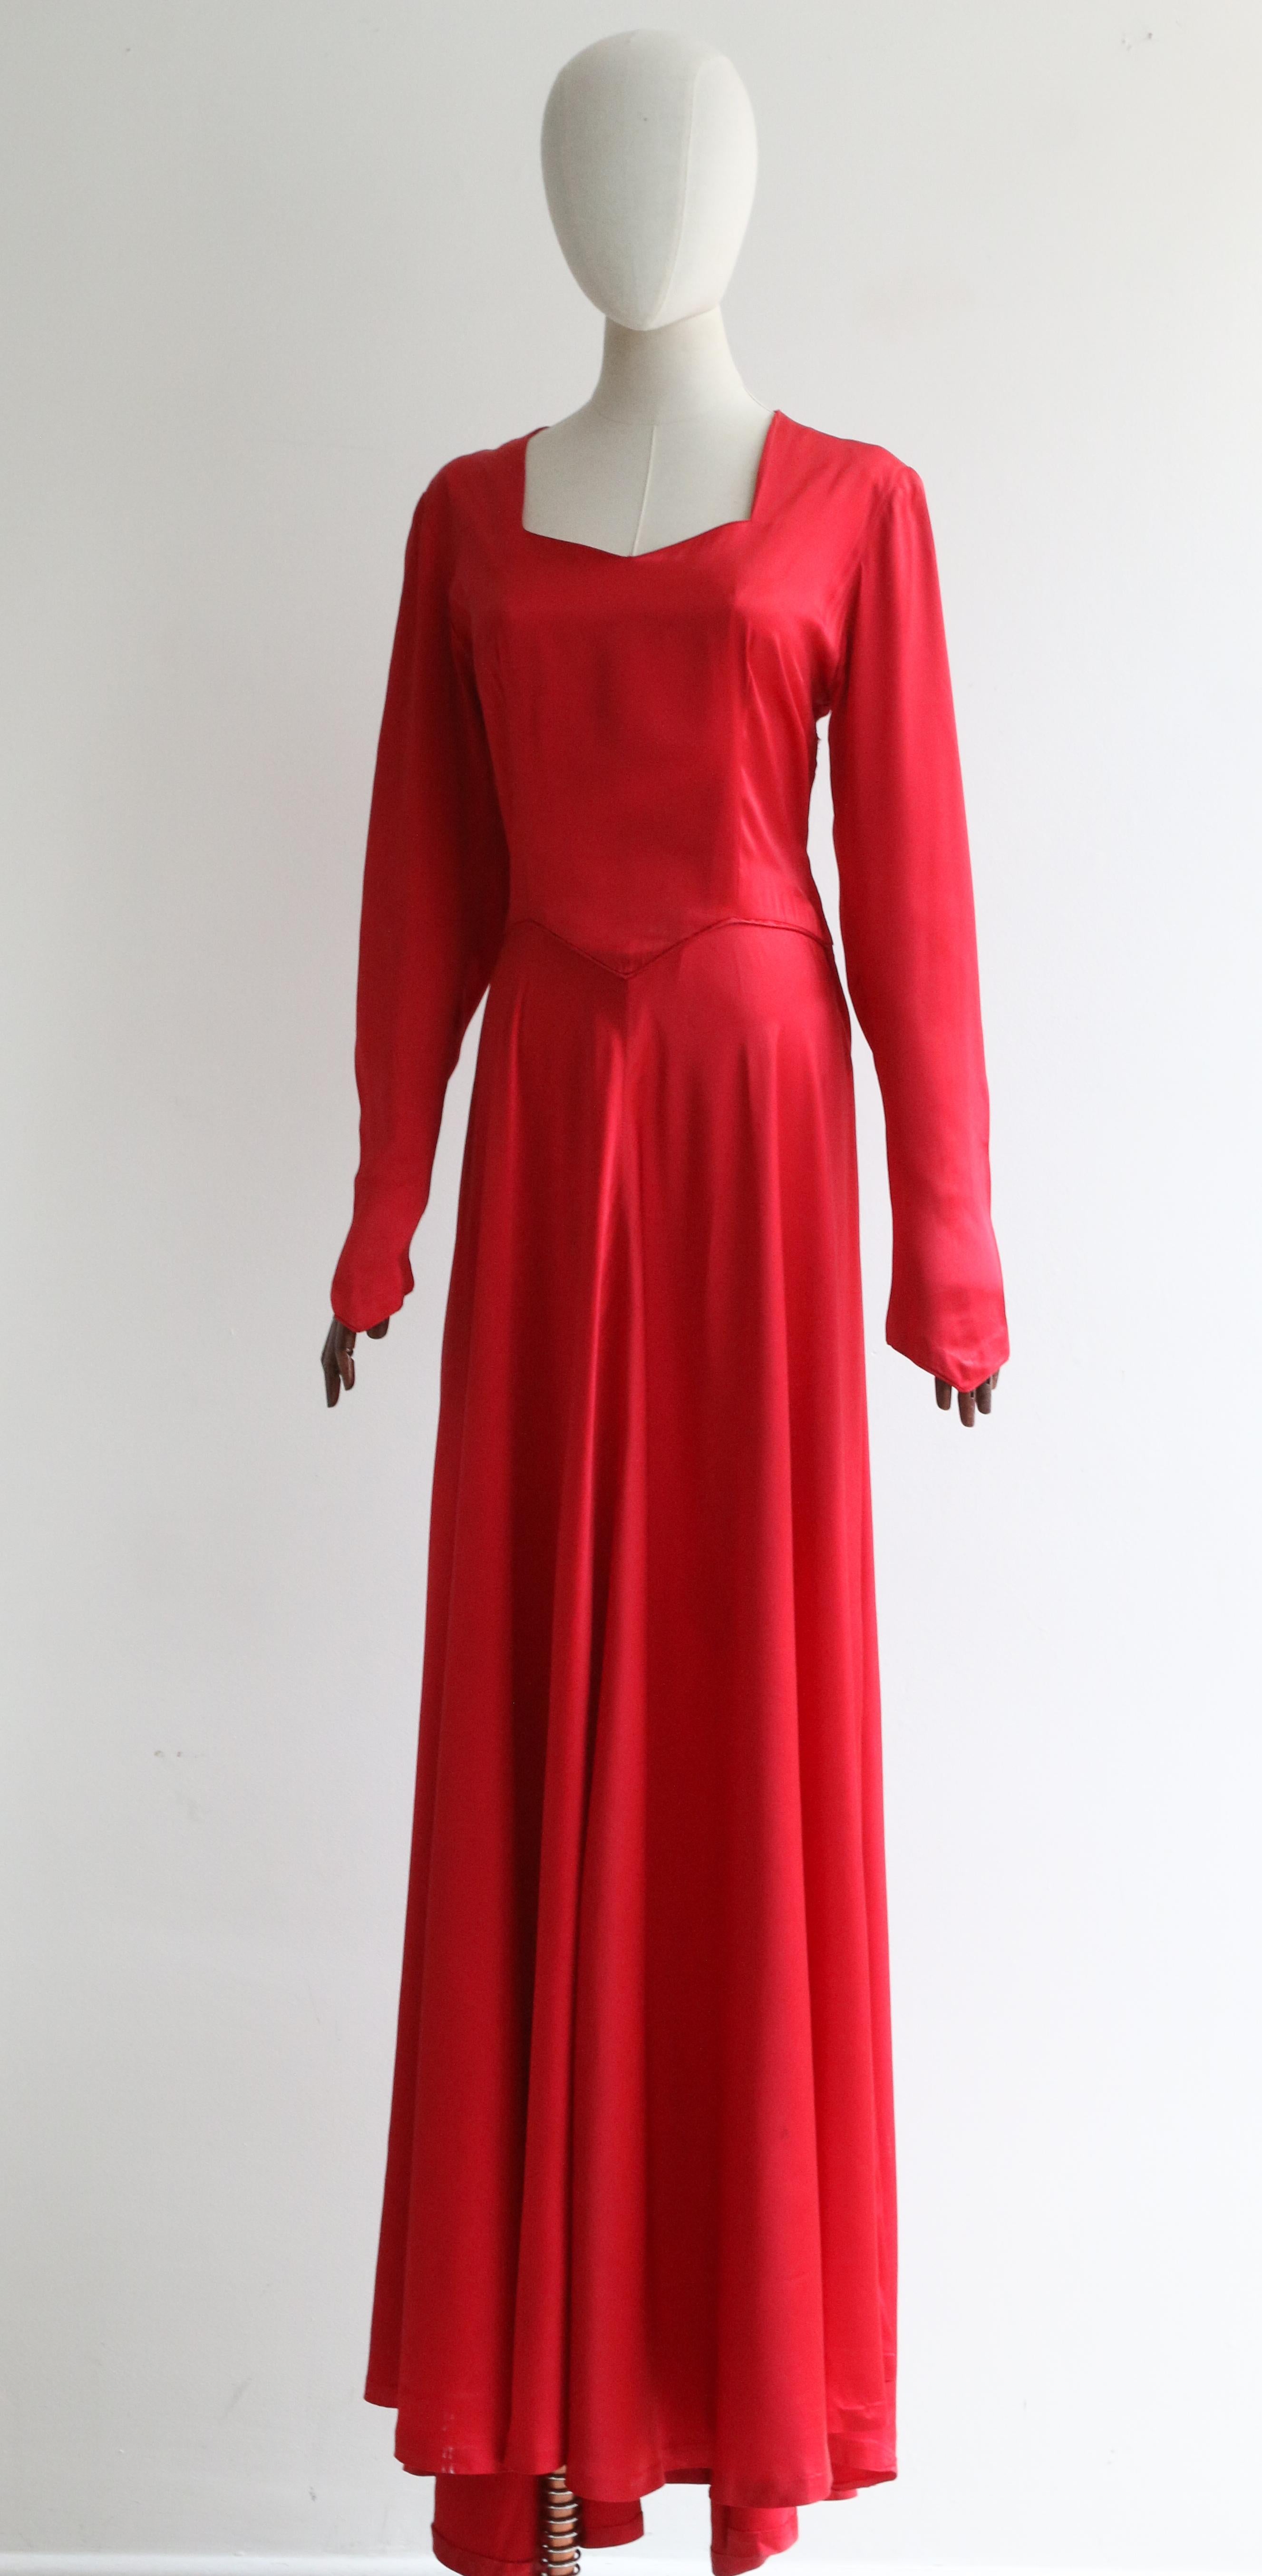 Vintage Early 1940's Crimson Red Satin Evening Dress UK 10-12 US 6-8 In Good Condition For Sale In Cheltenham, GB